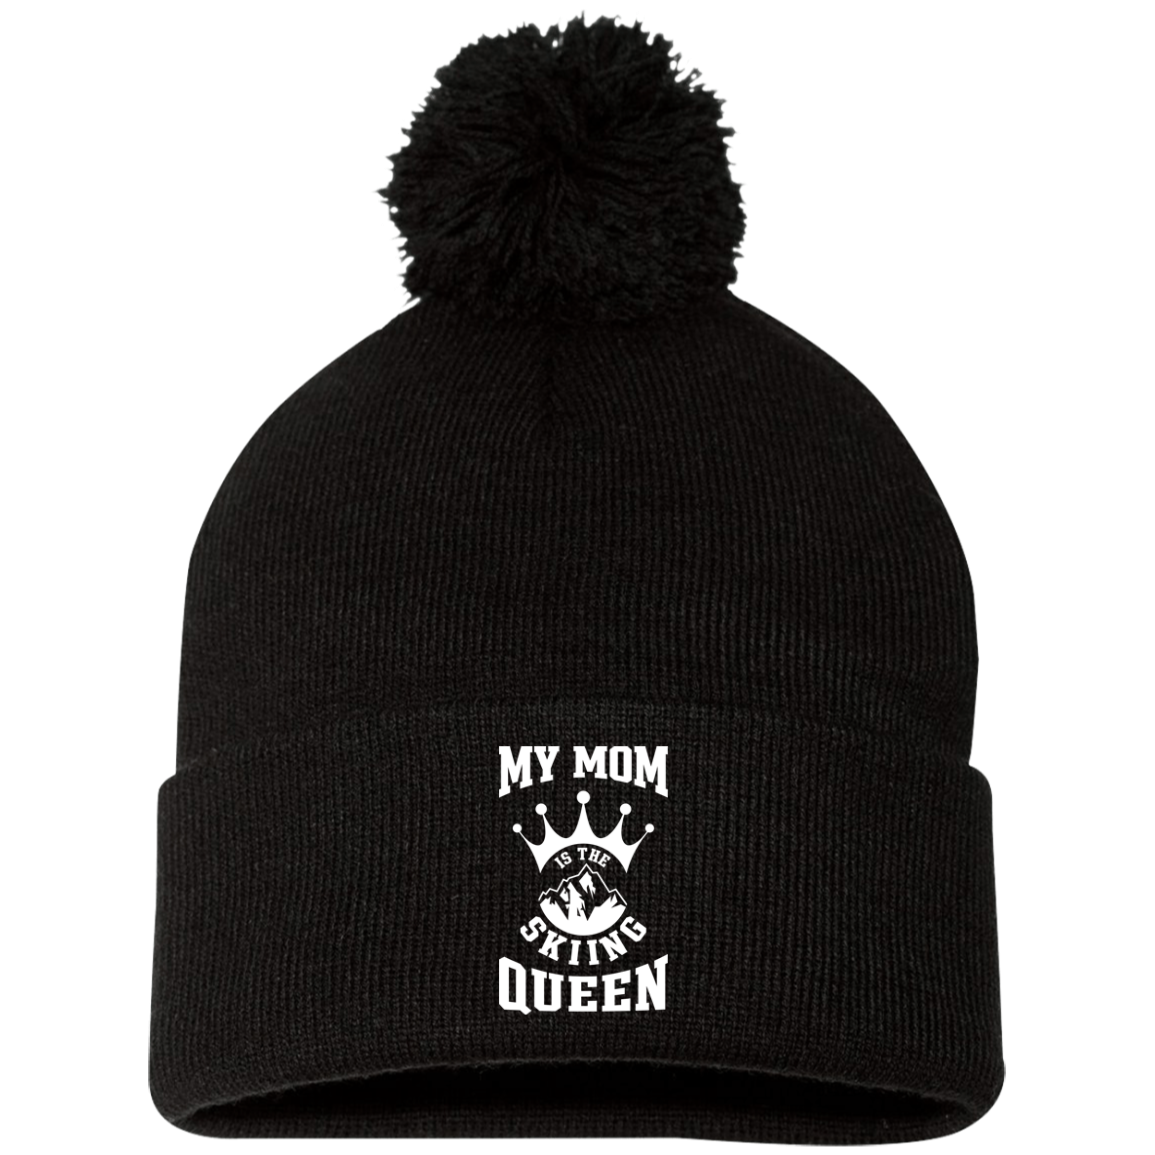 My Mom is The Skiing Queen Pom Pom Knit Cap - Powderaddicts